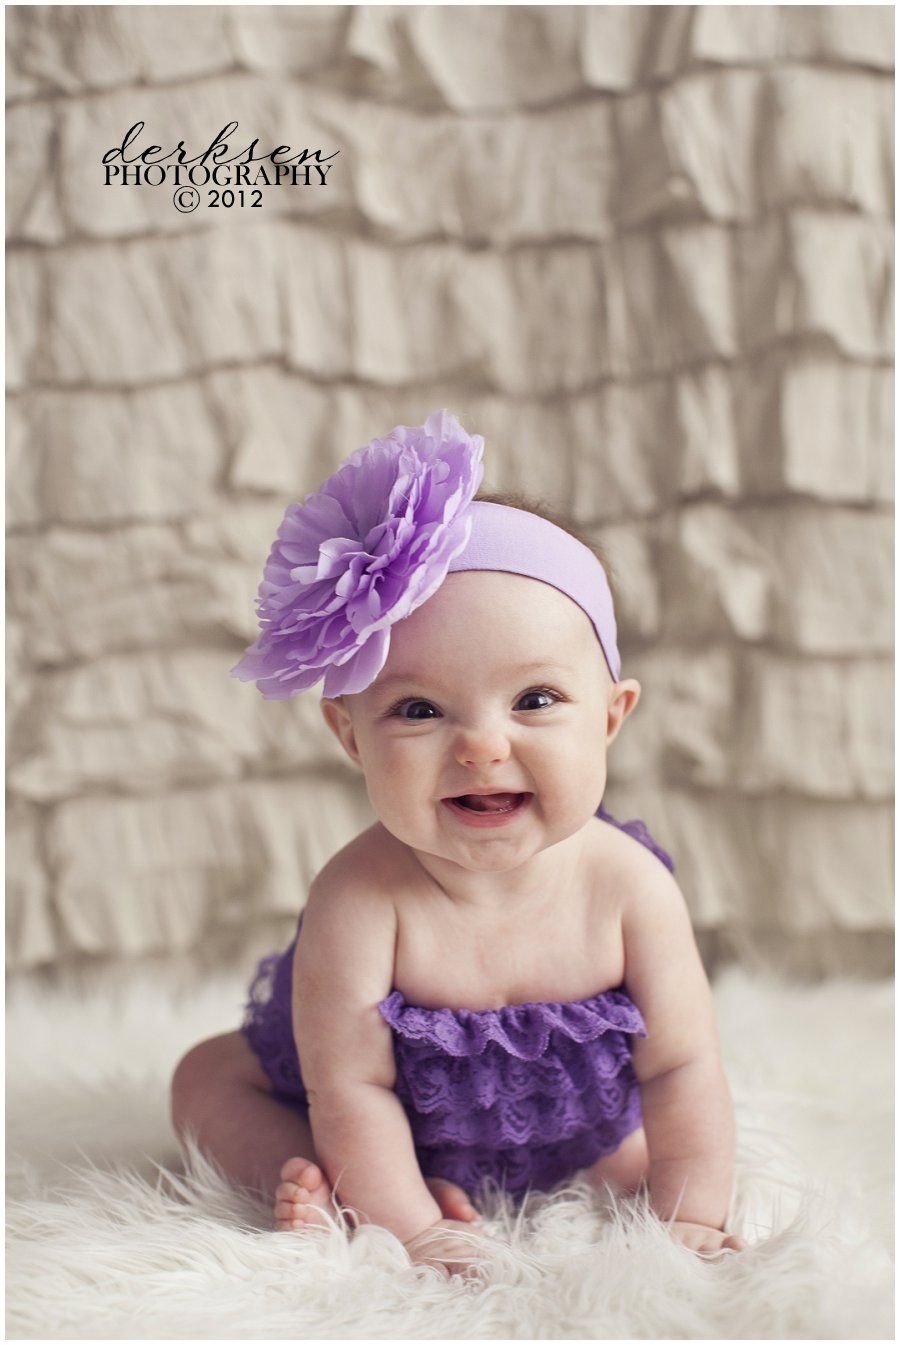 10 Fabulous 6 Month Old Baby Picture Ideas sweet little 6 month old the best age baby photography 7 2022